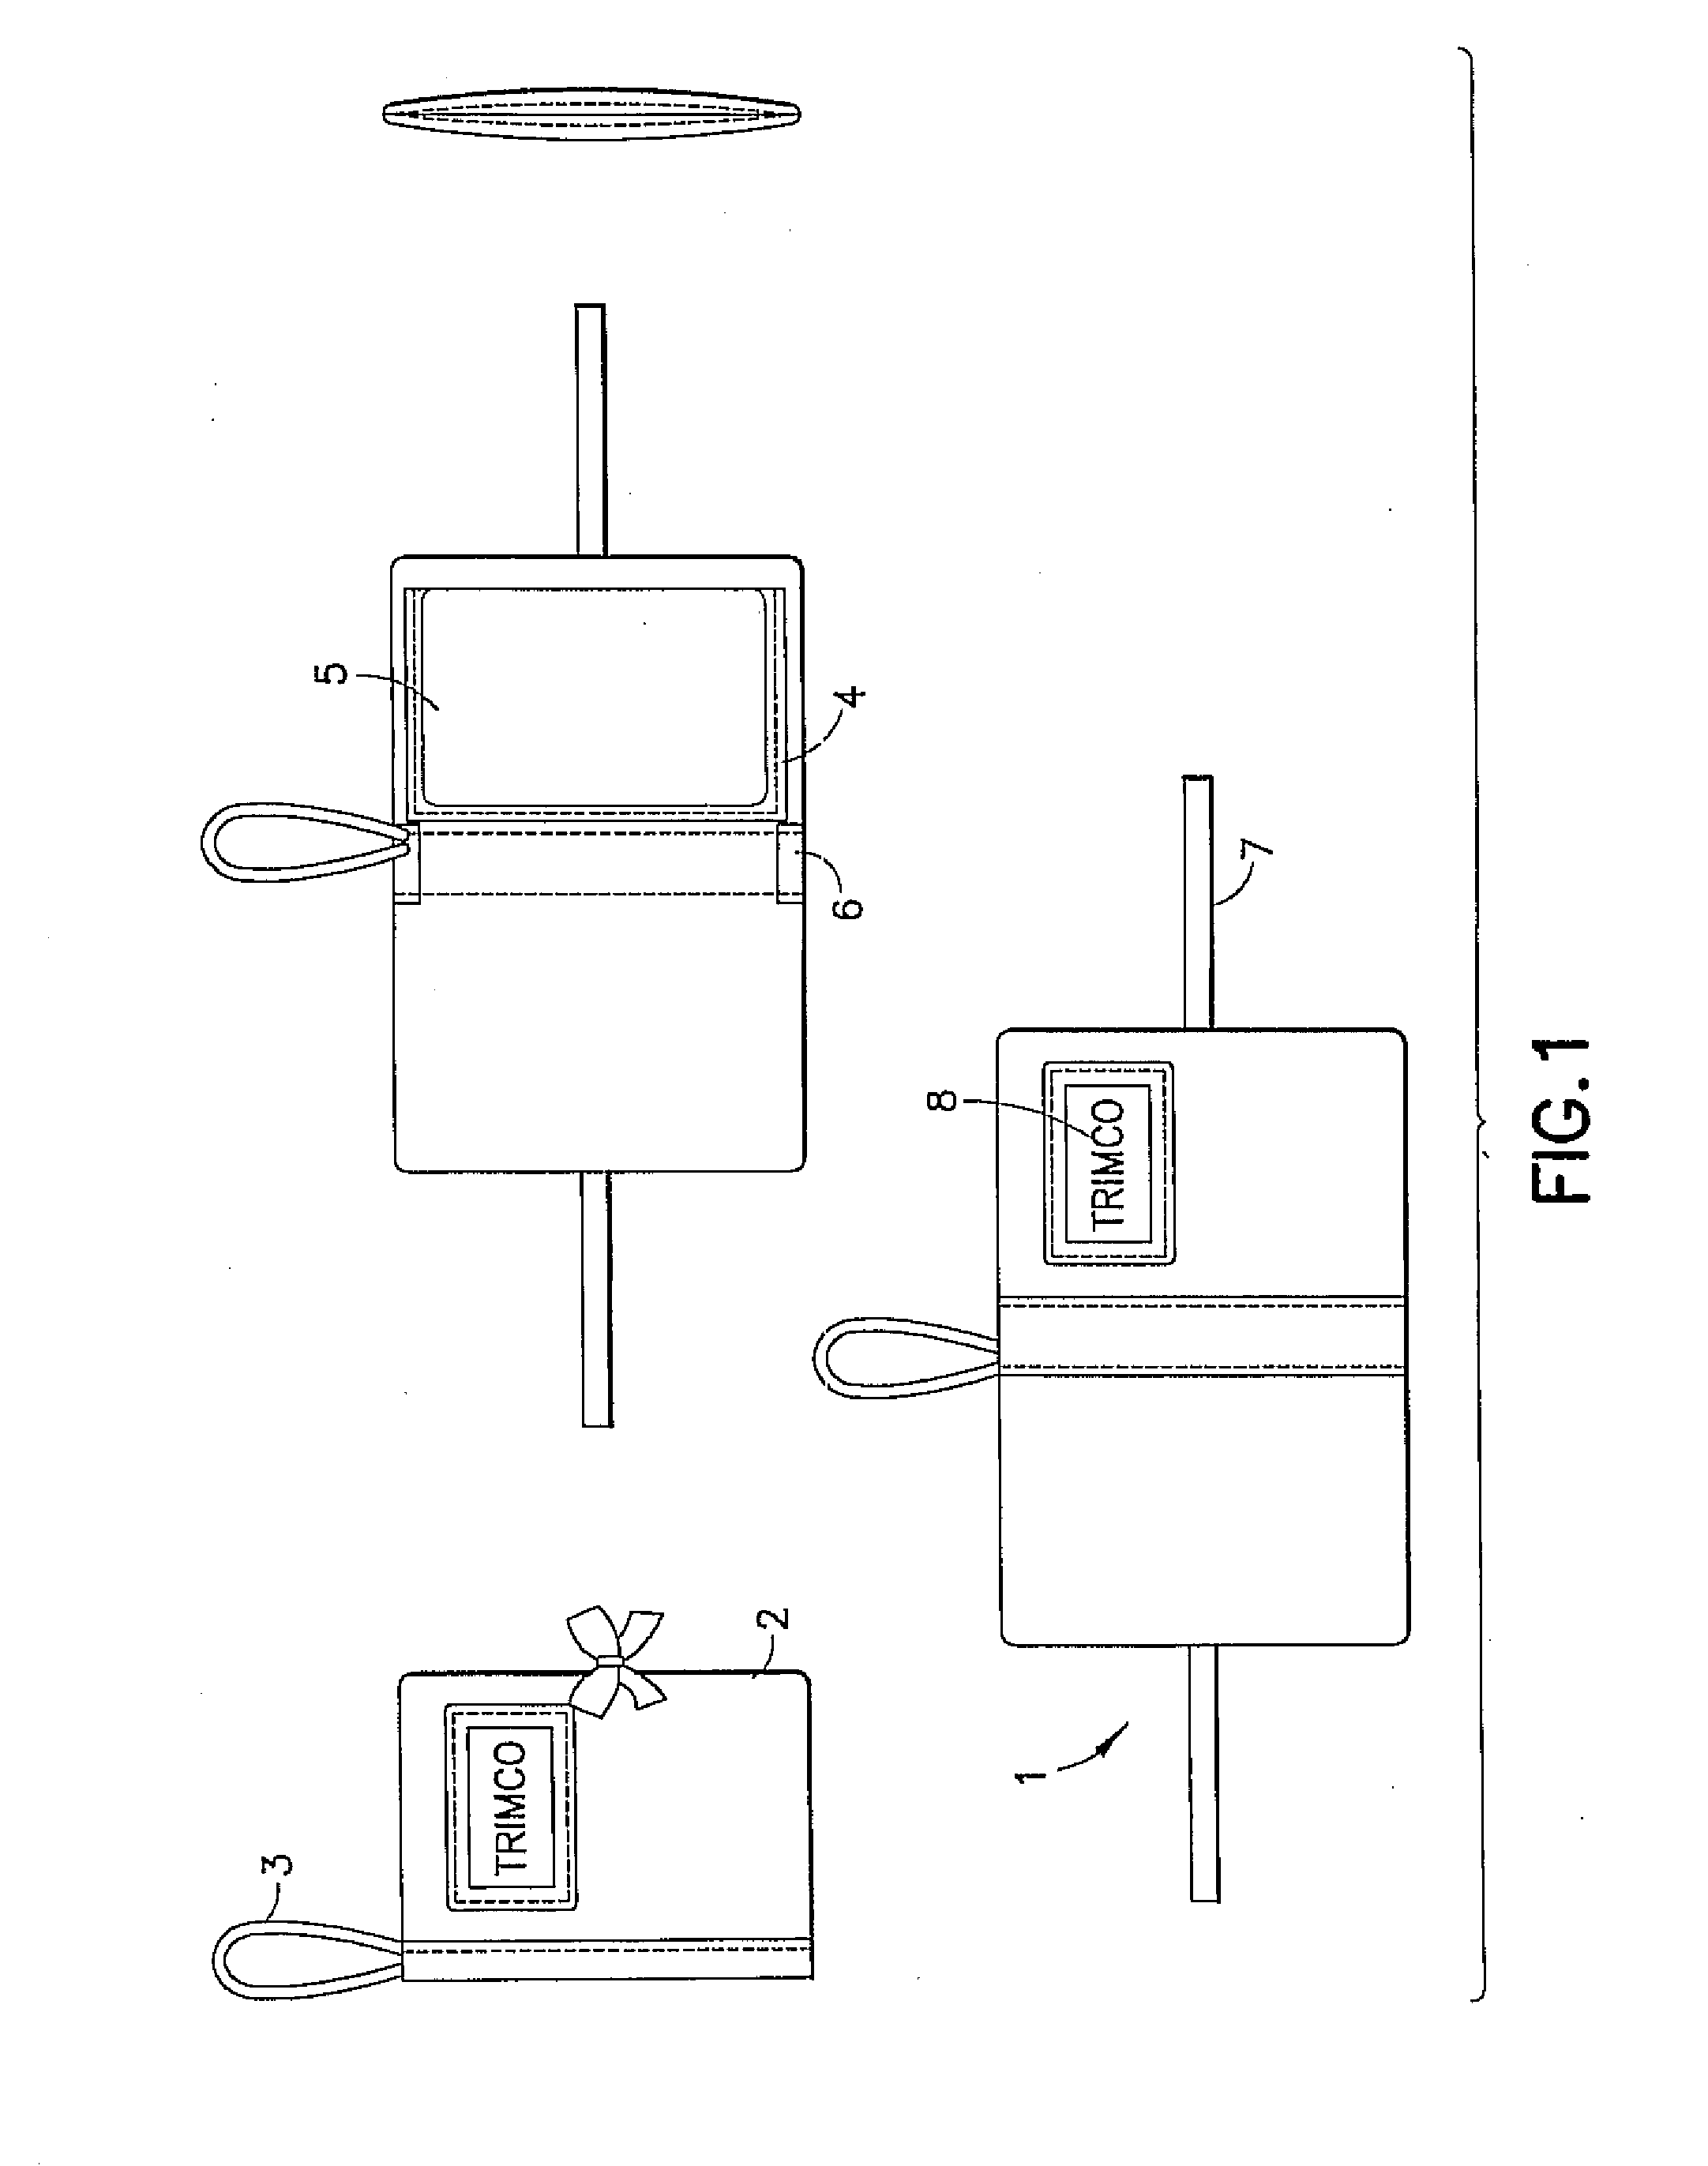 Plush delivery vehicle device and kit containing the same